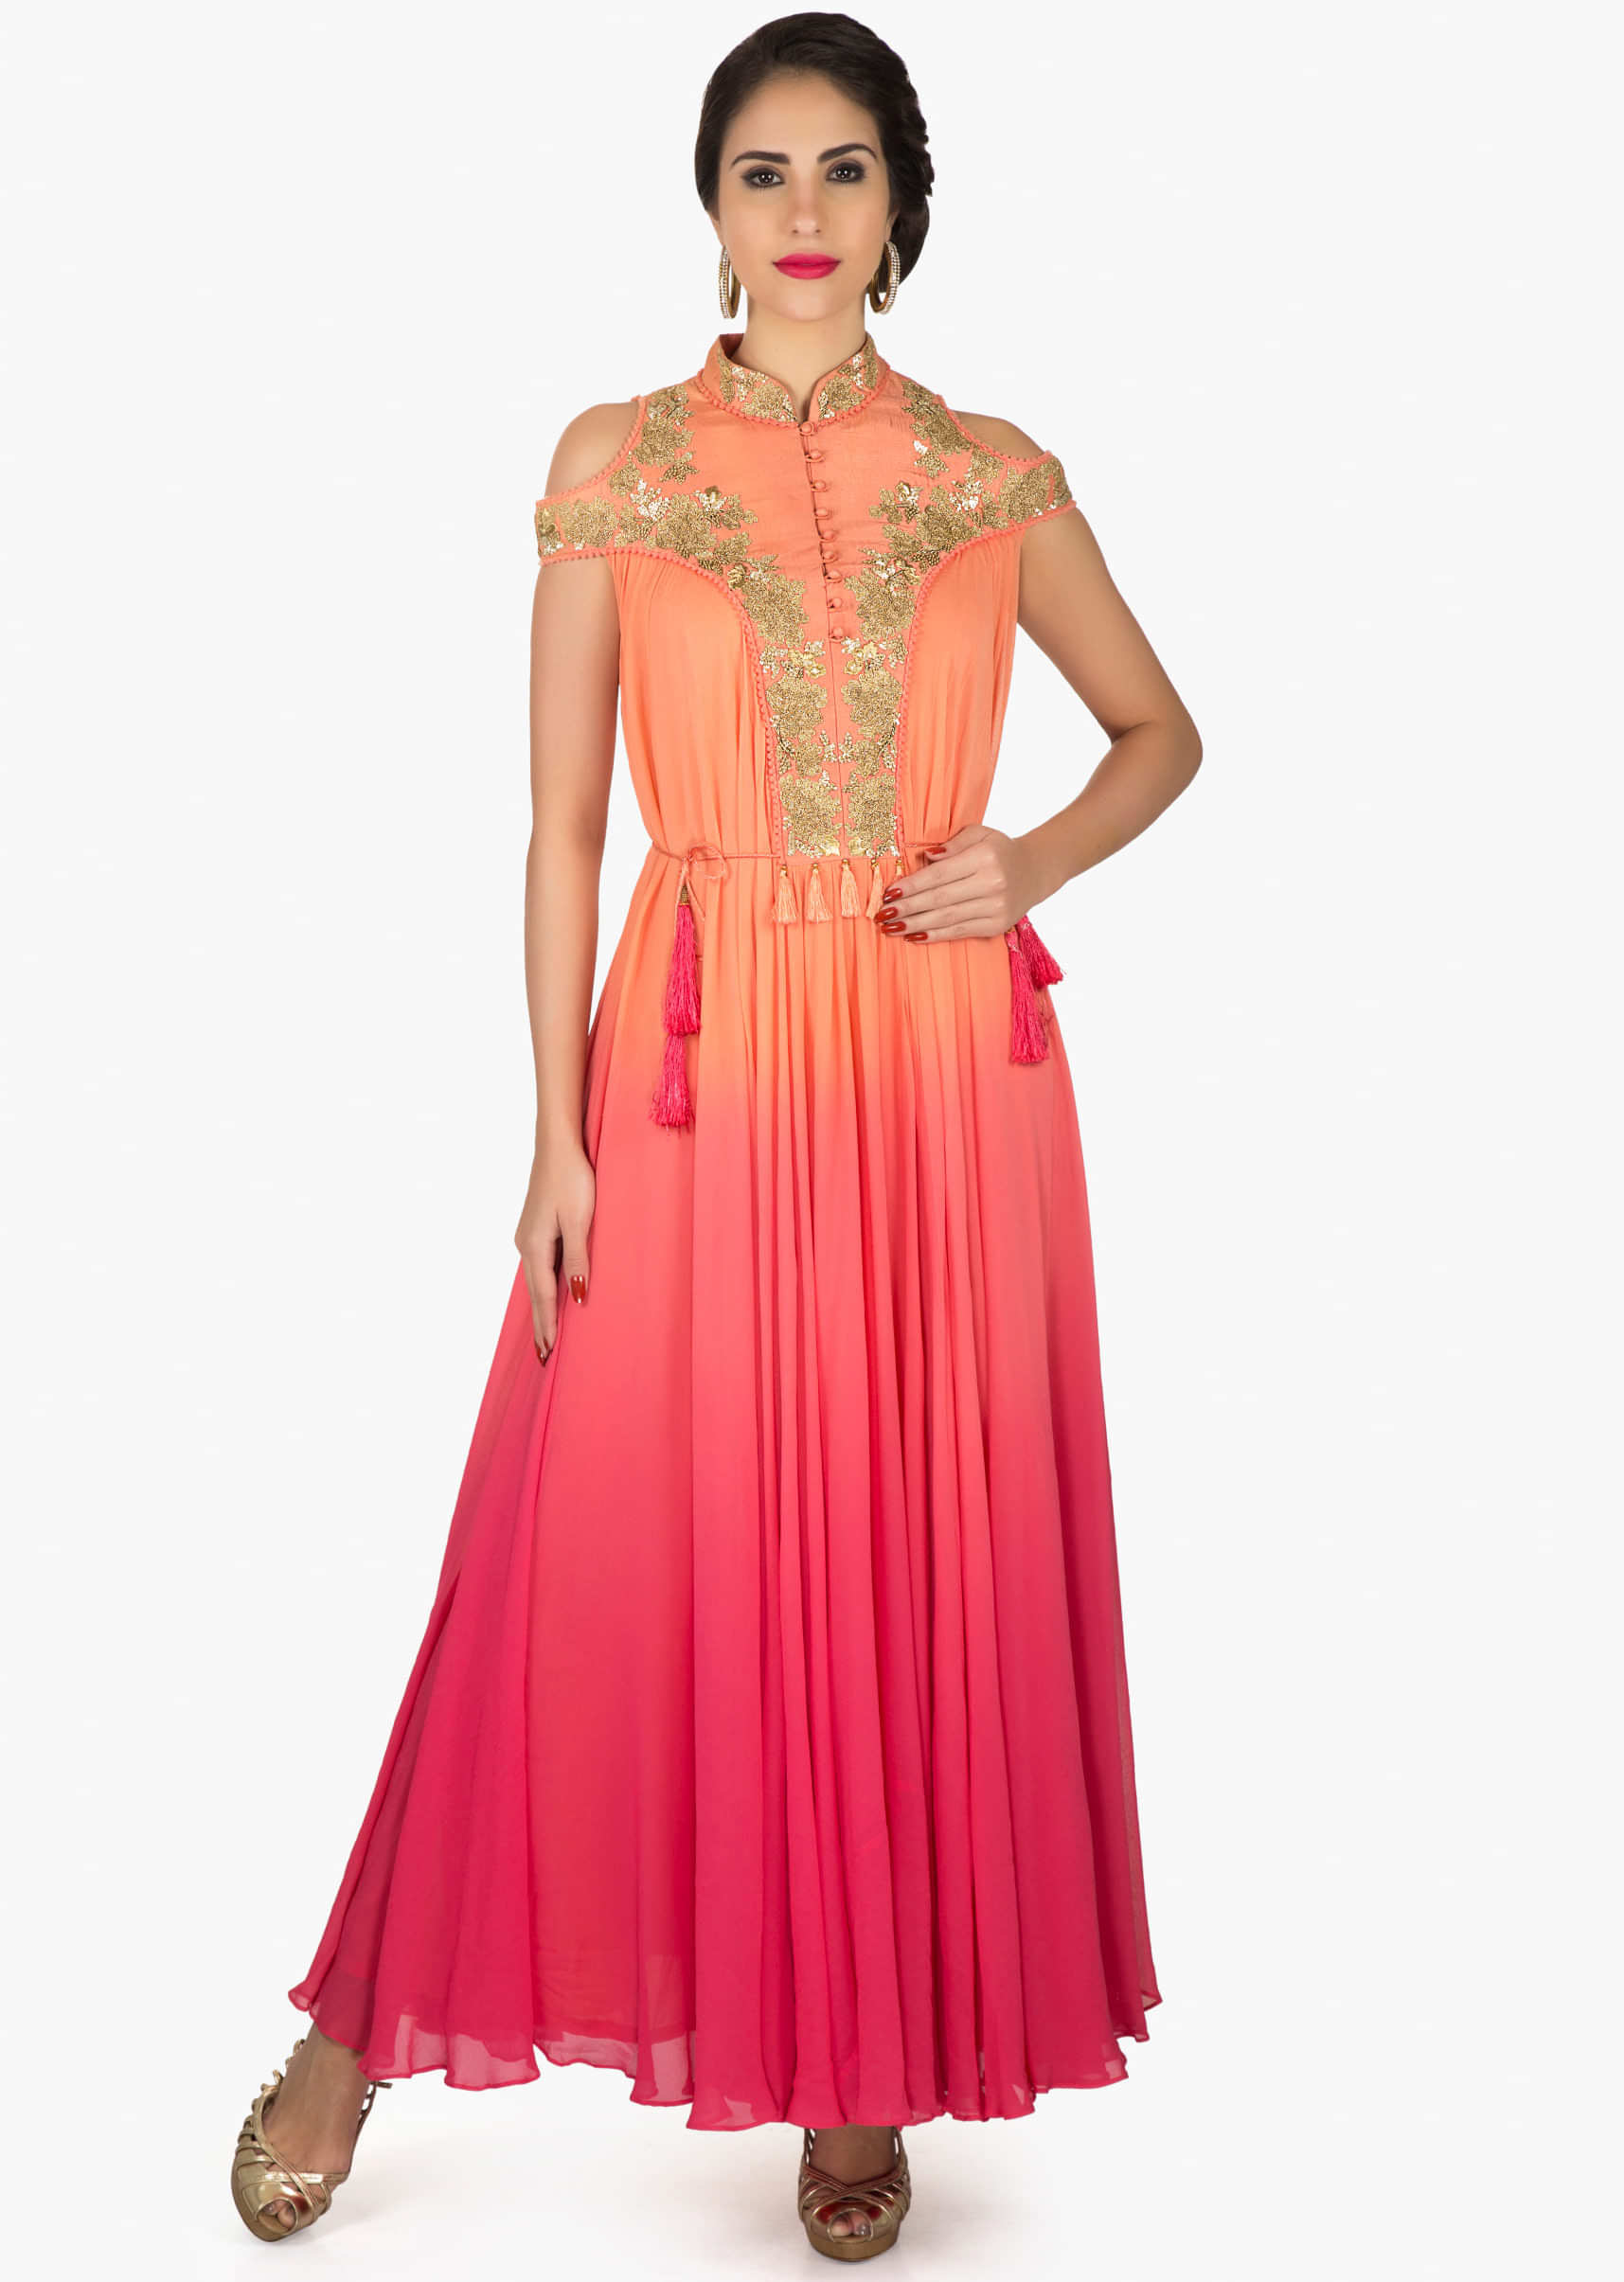 Orange and coral anarkali kurti in cold shoulder with embroidered collar and placket only on Kalki